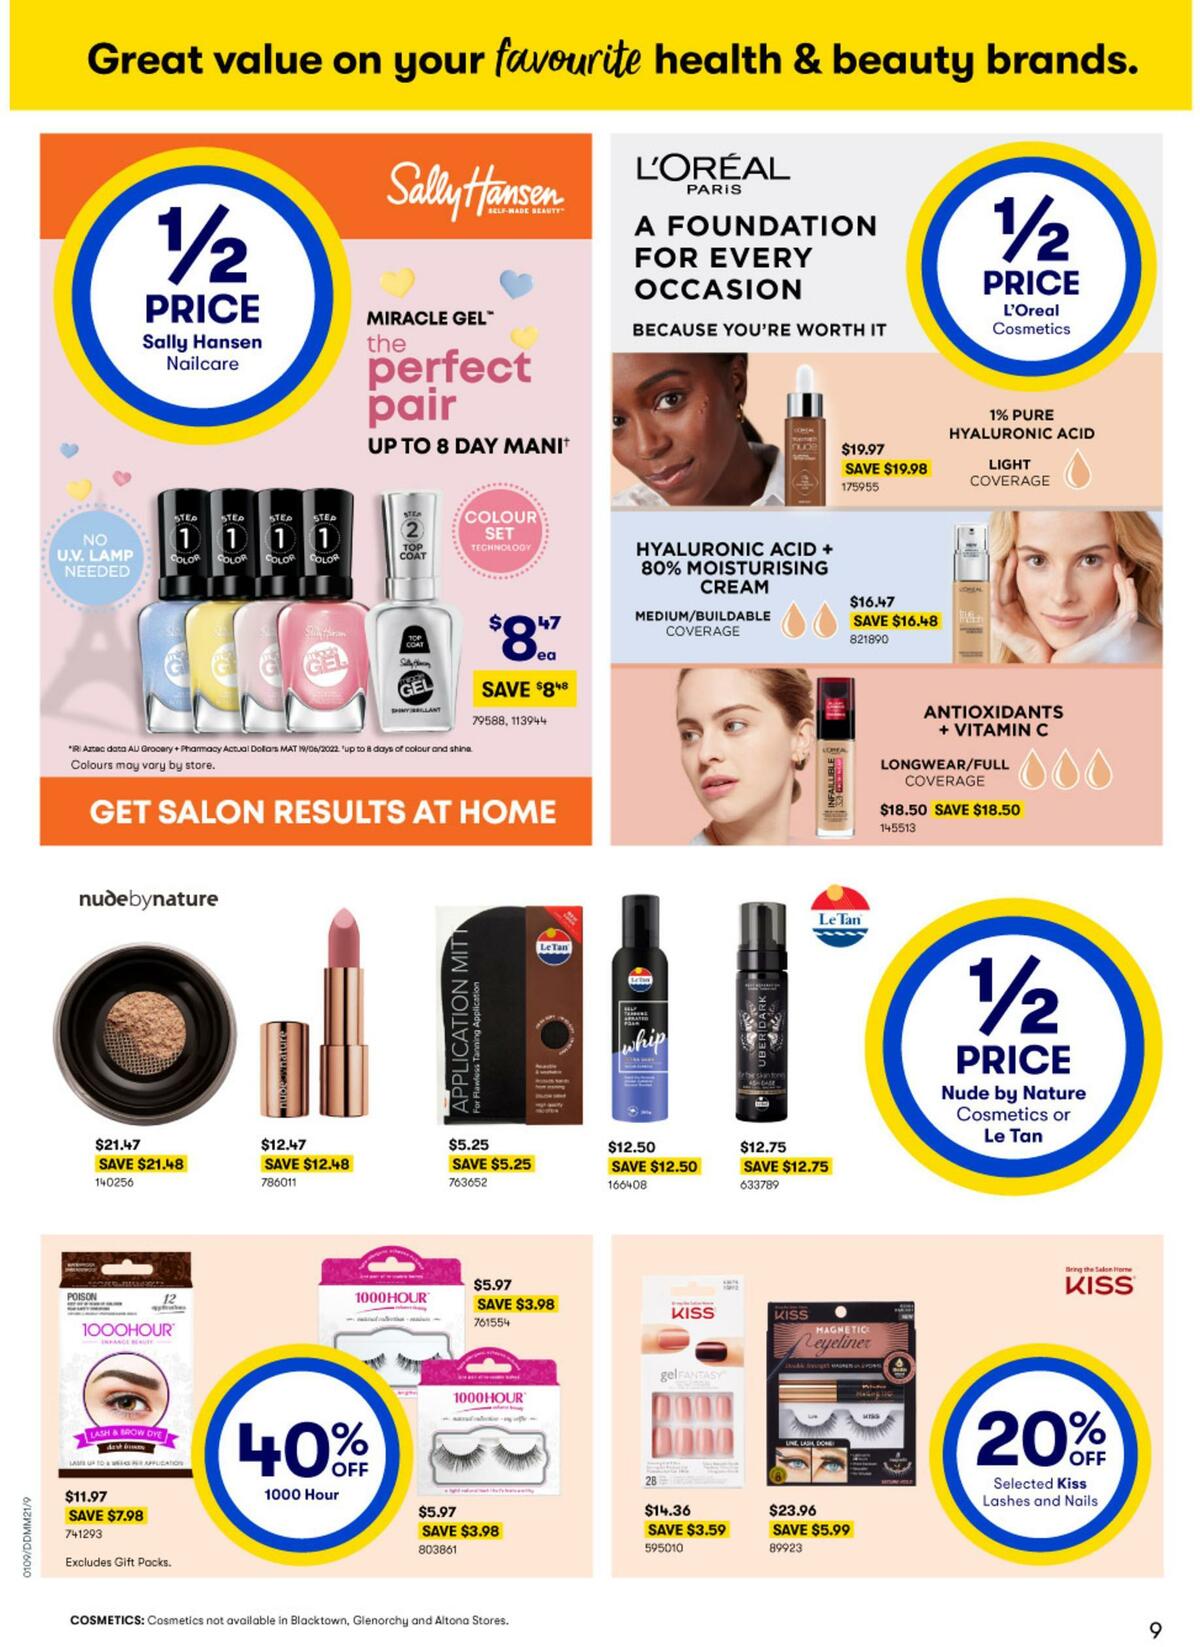 Big W Great Value On Your Favourite Brands Catalogues from 15 September